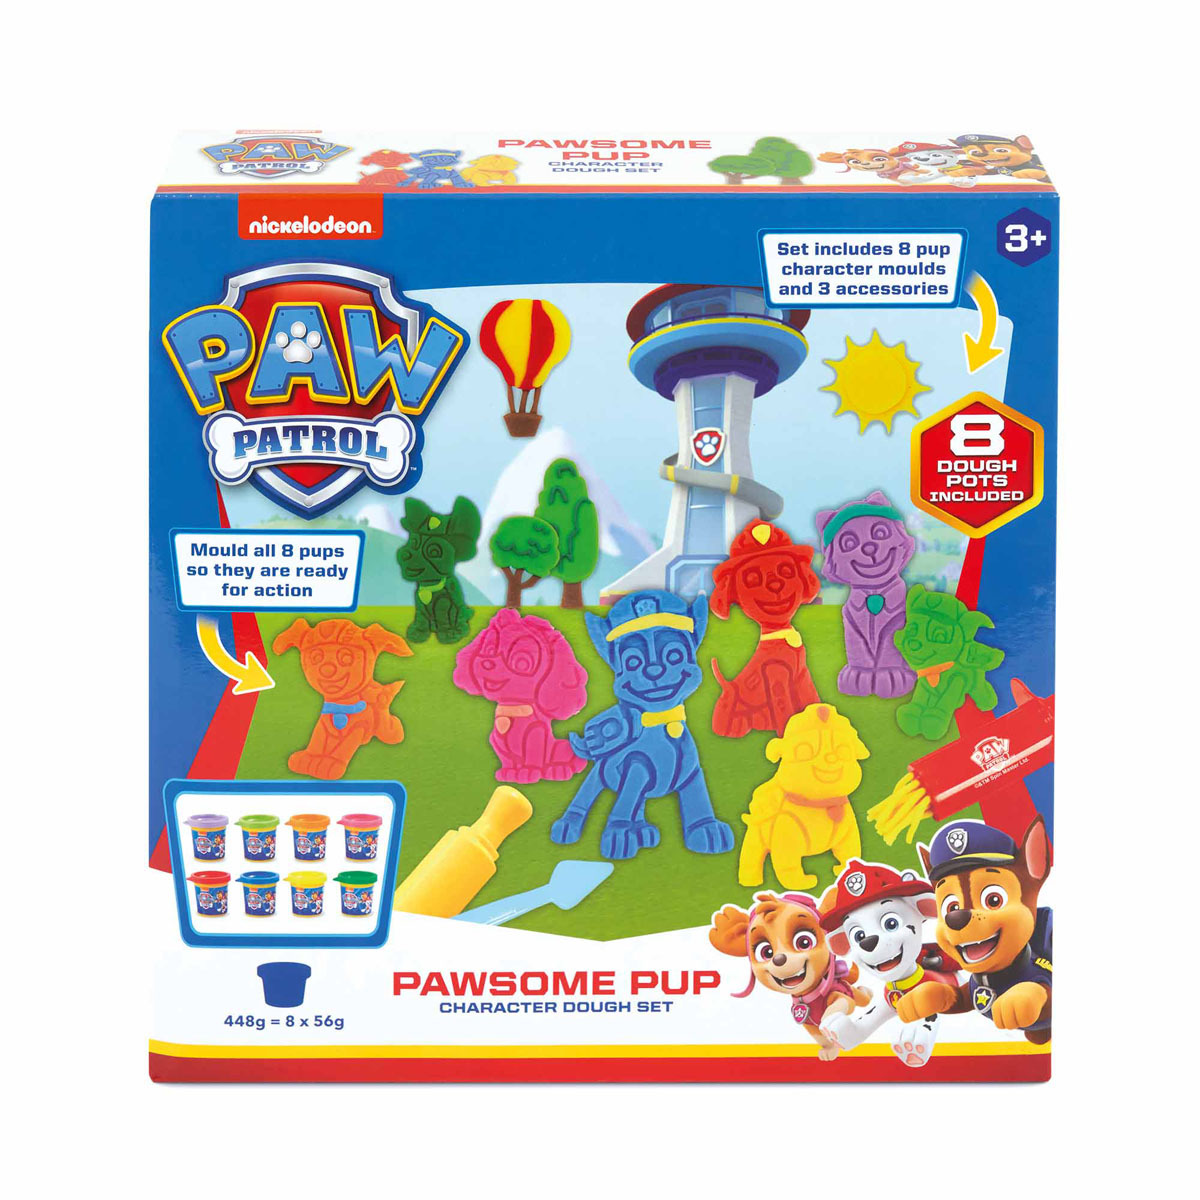 Nickelodeon Paw Patrol Pawsome Pup Character Dough Set | Early Learning  Centre